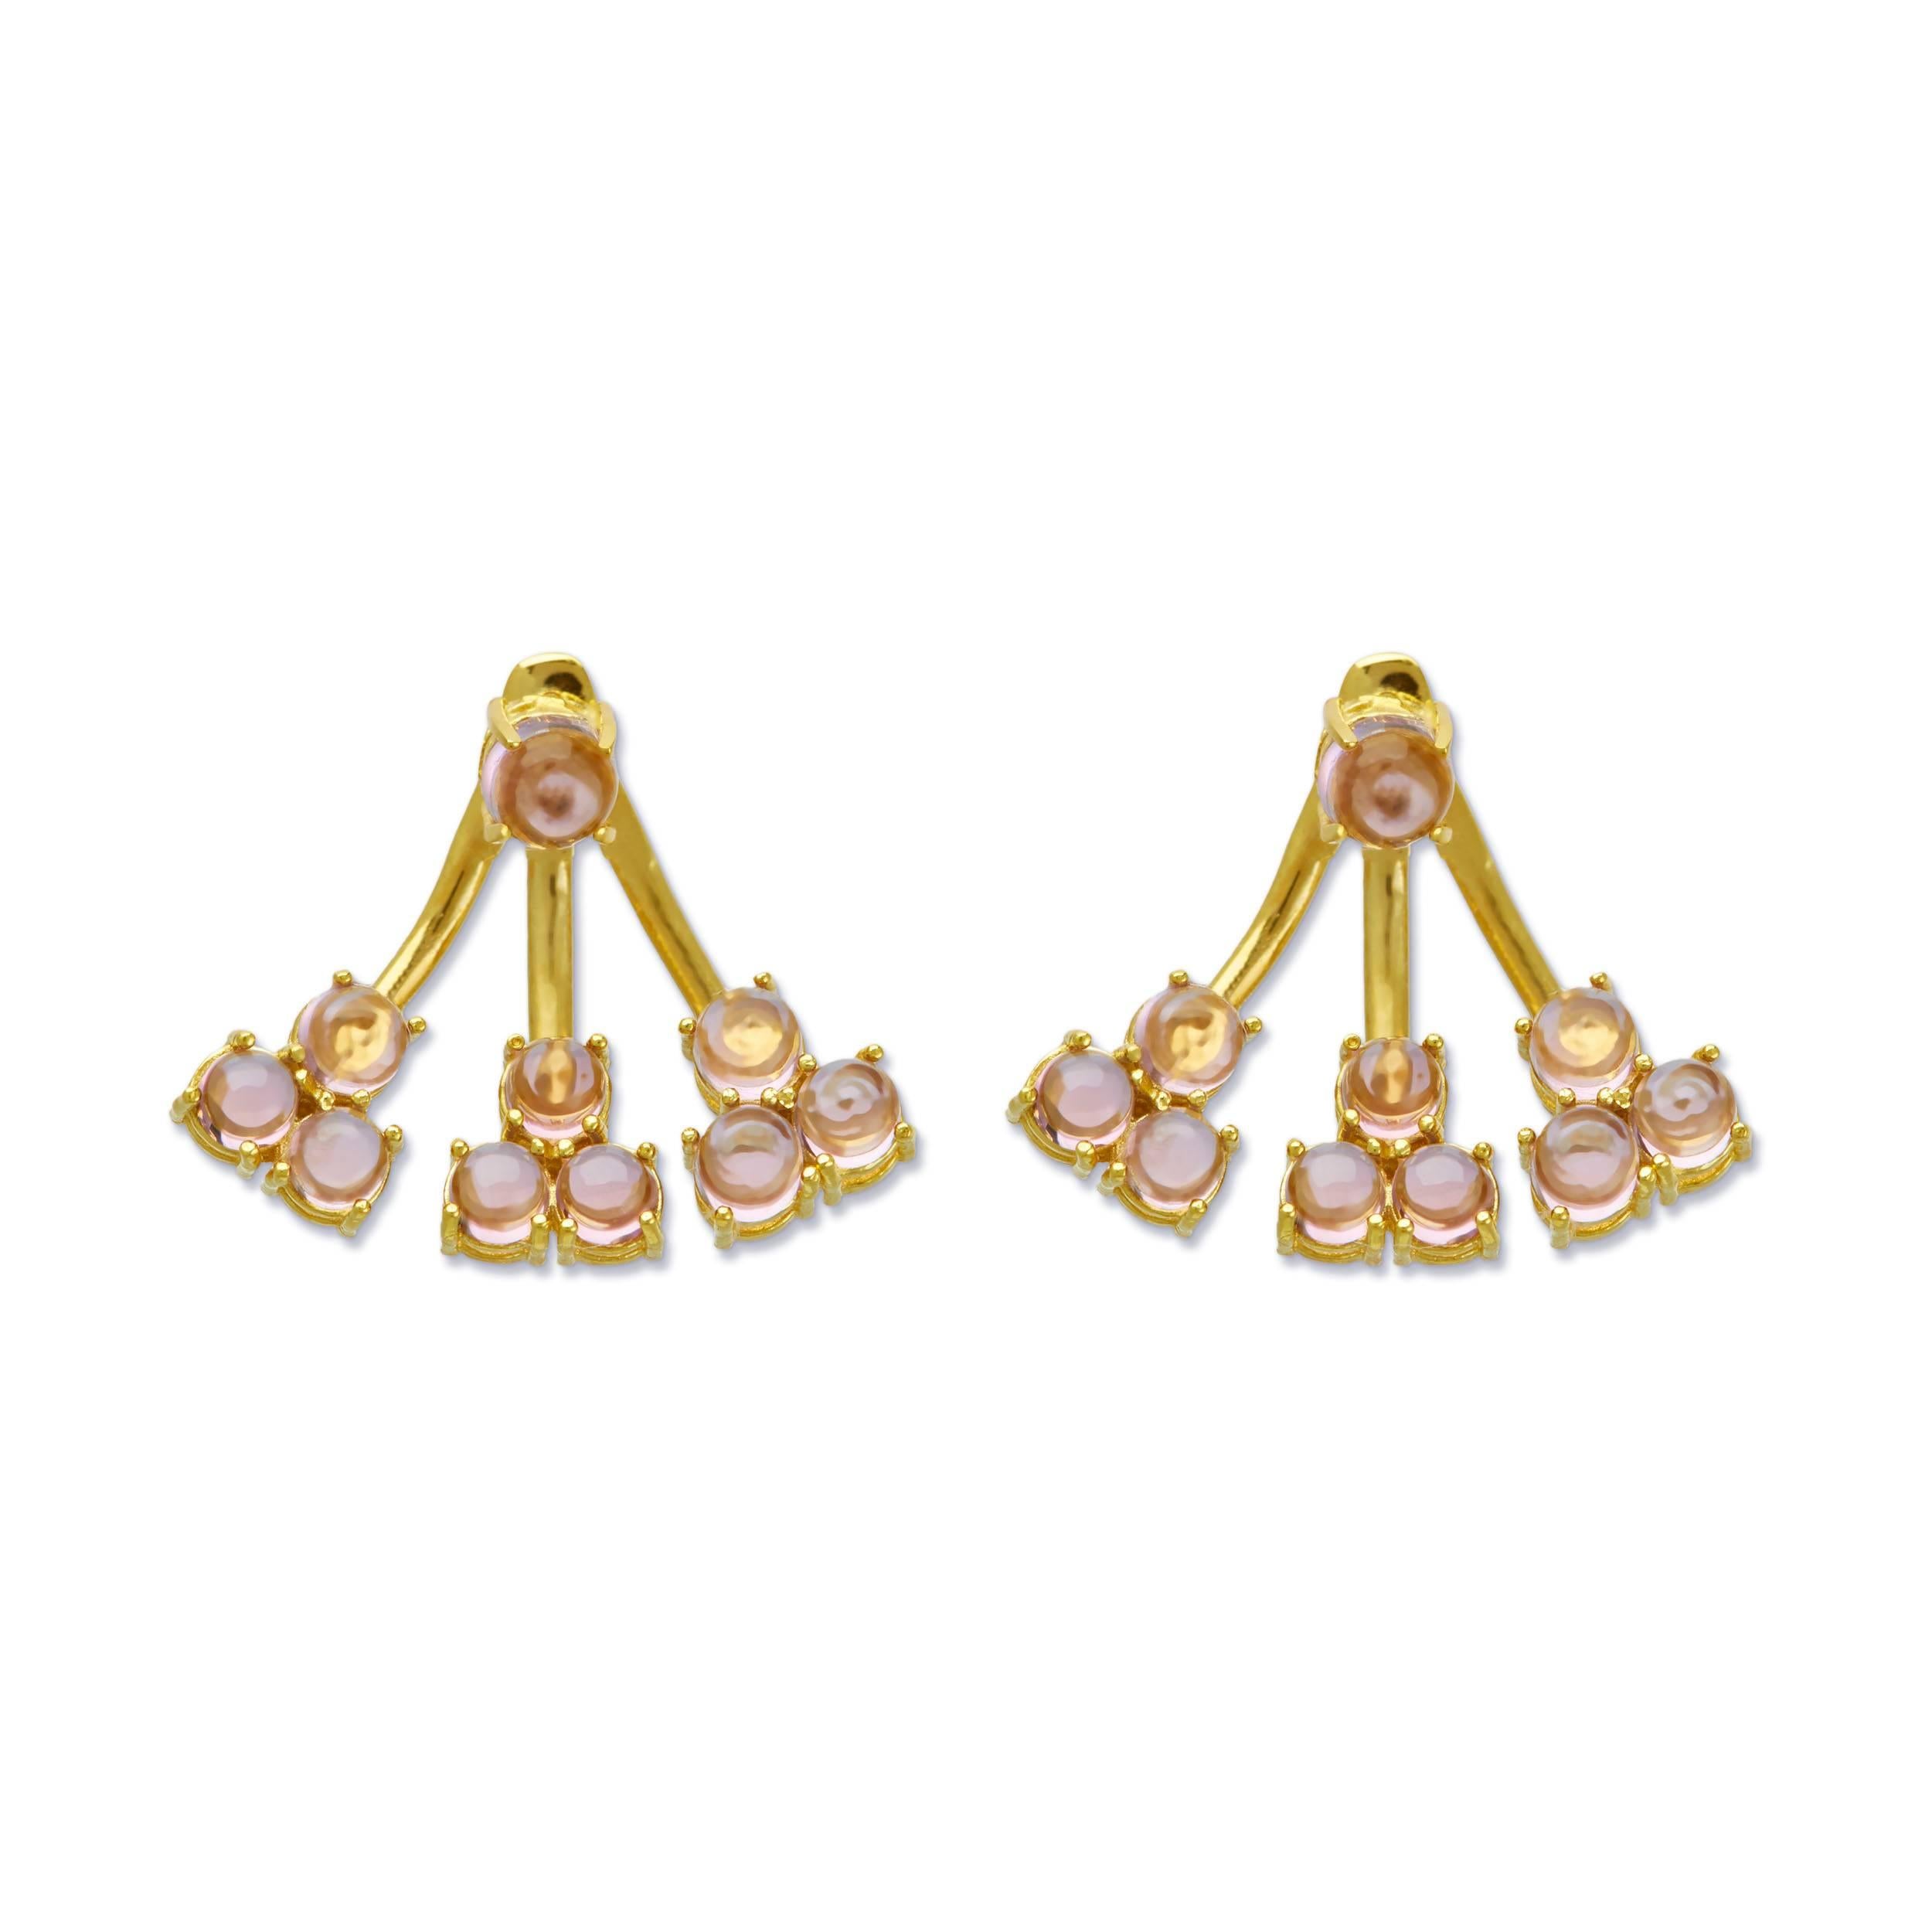 Our newest addition to our Collection this year brings a feminine flower Jacket earring in 18kt Yellow gold Vermeil and multiple colours to a trendy sophisticated style. The ear jacket has two hole openings to adapt to one's ear and the level they